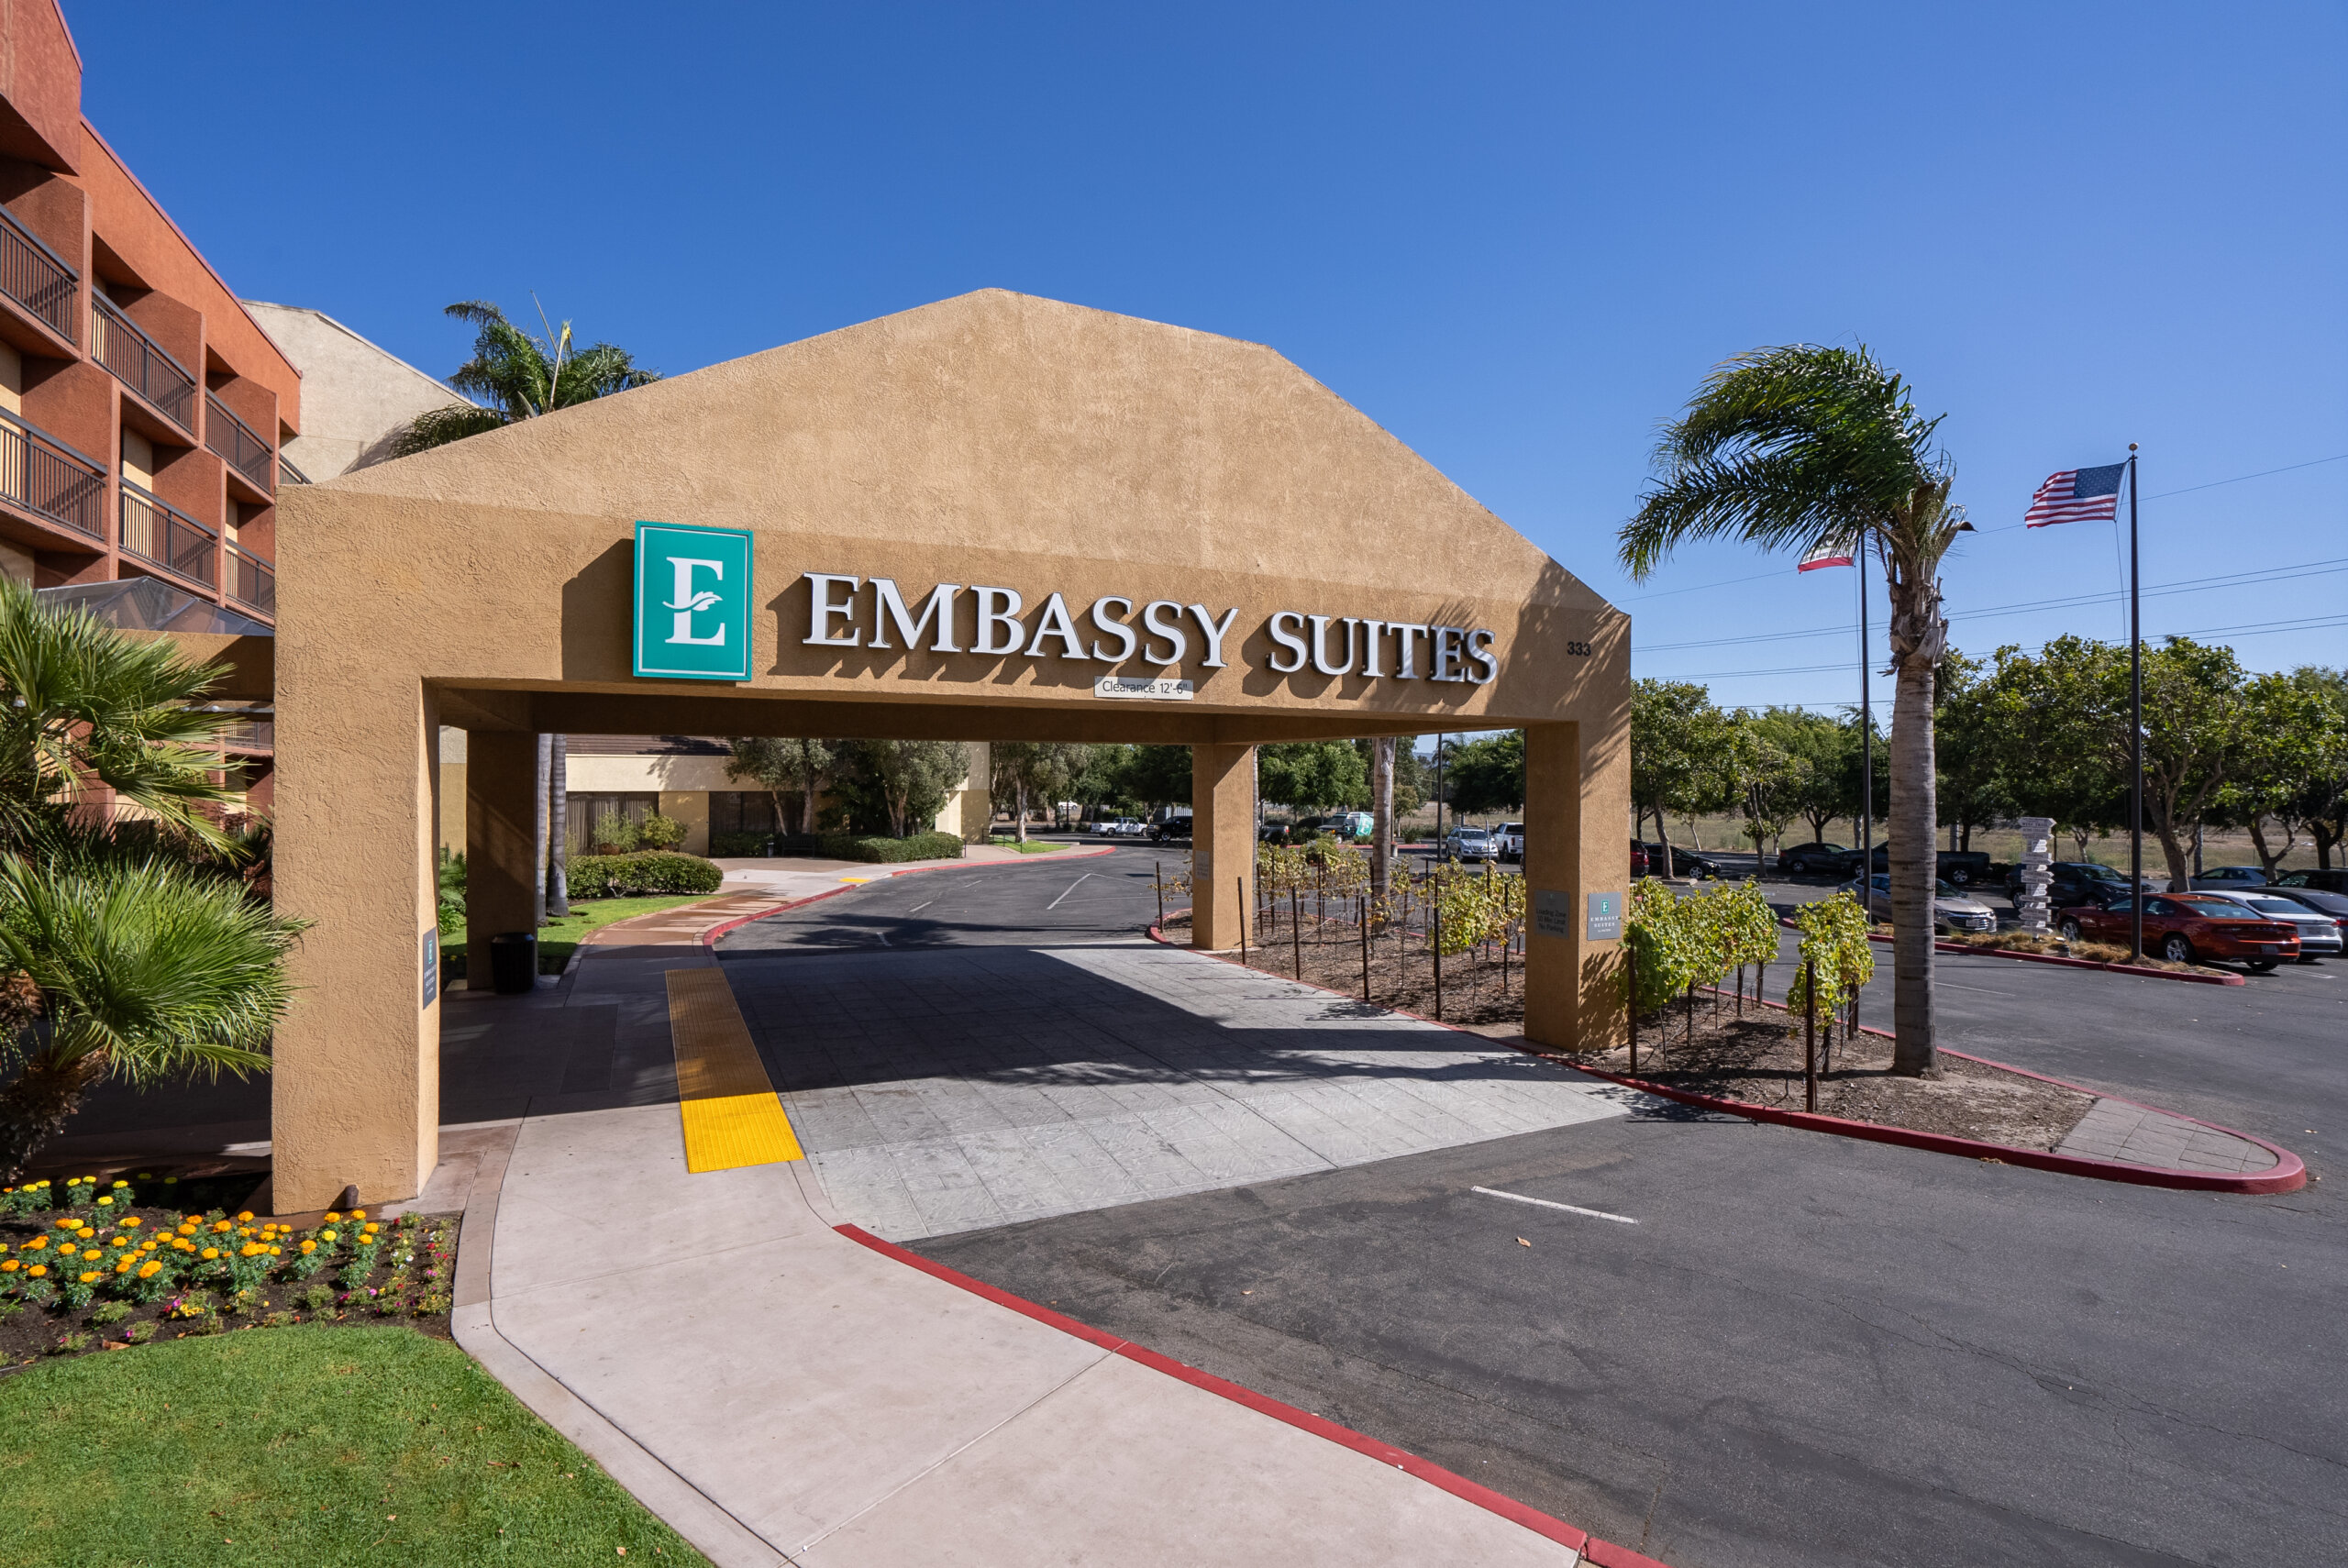 Embassy Suites San Diego Bay Downtown- First Class San Diego, CA Hotels-  GDS Reservation Codes: Travel Weekly